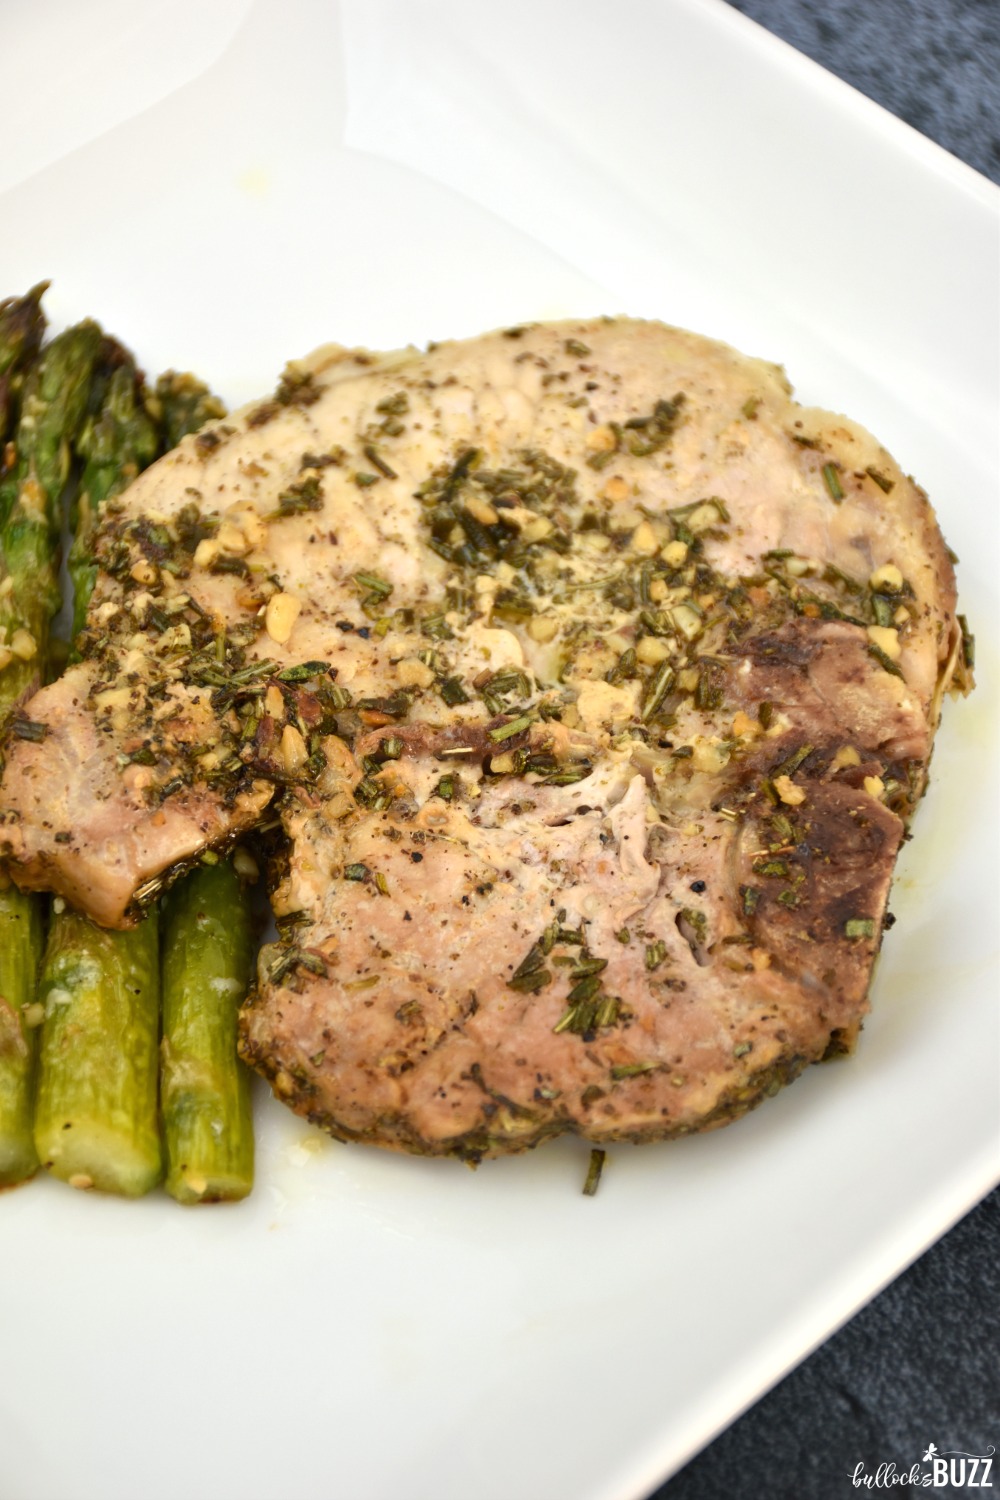 This Rosemary Sage Pork Chops recipe comes together in about 20 minutes or less. And it tastes amazing! So simple. Yet, so delicious.